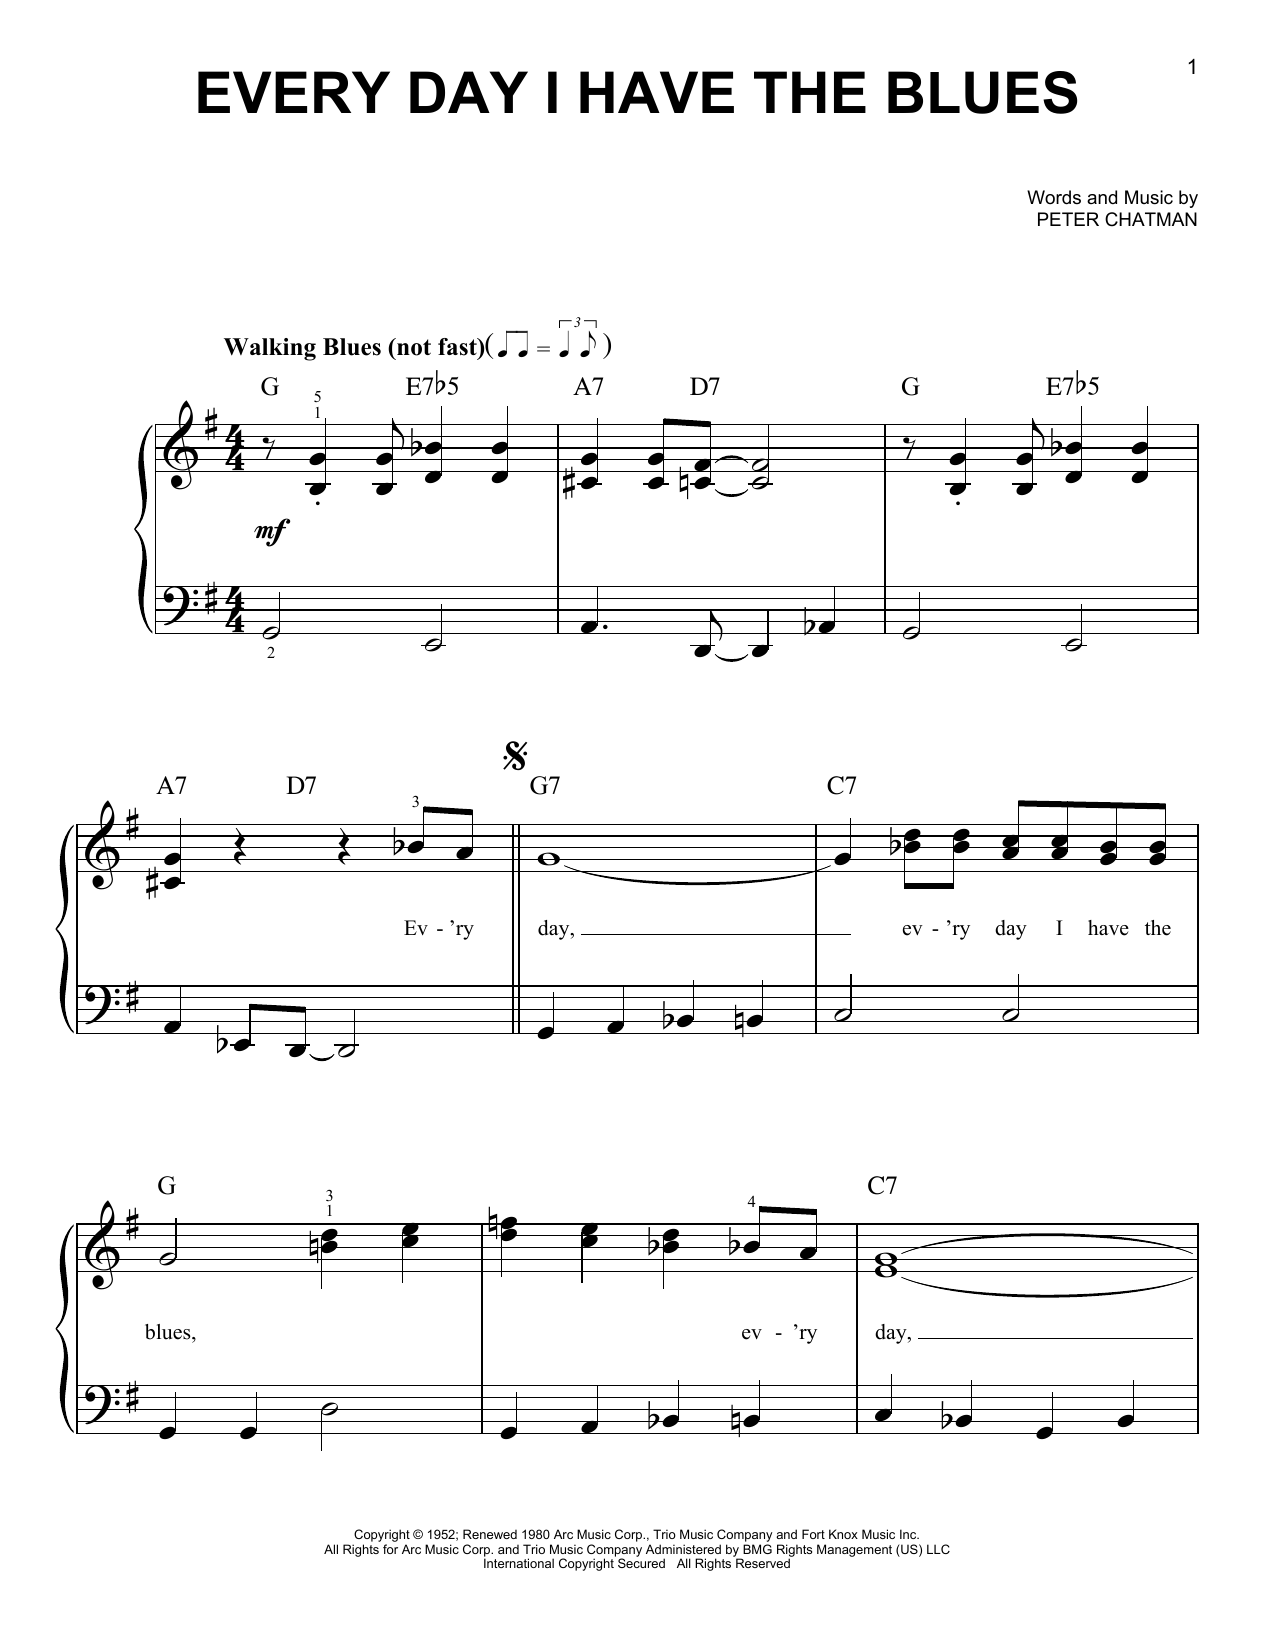 Download B.B. King Every Day I Have The Blues Sheet Music